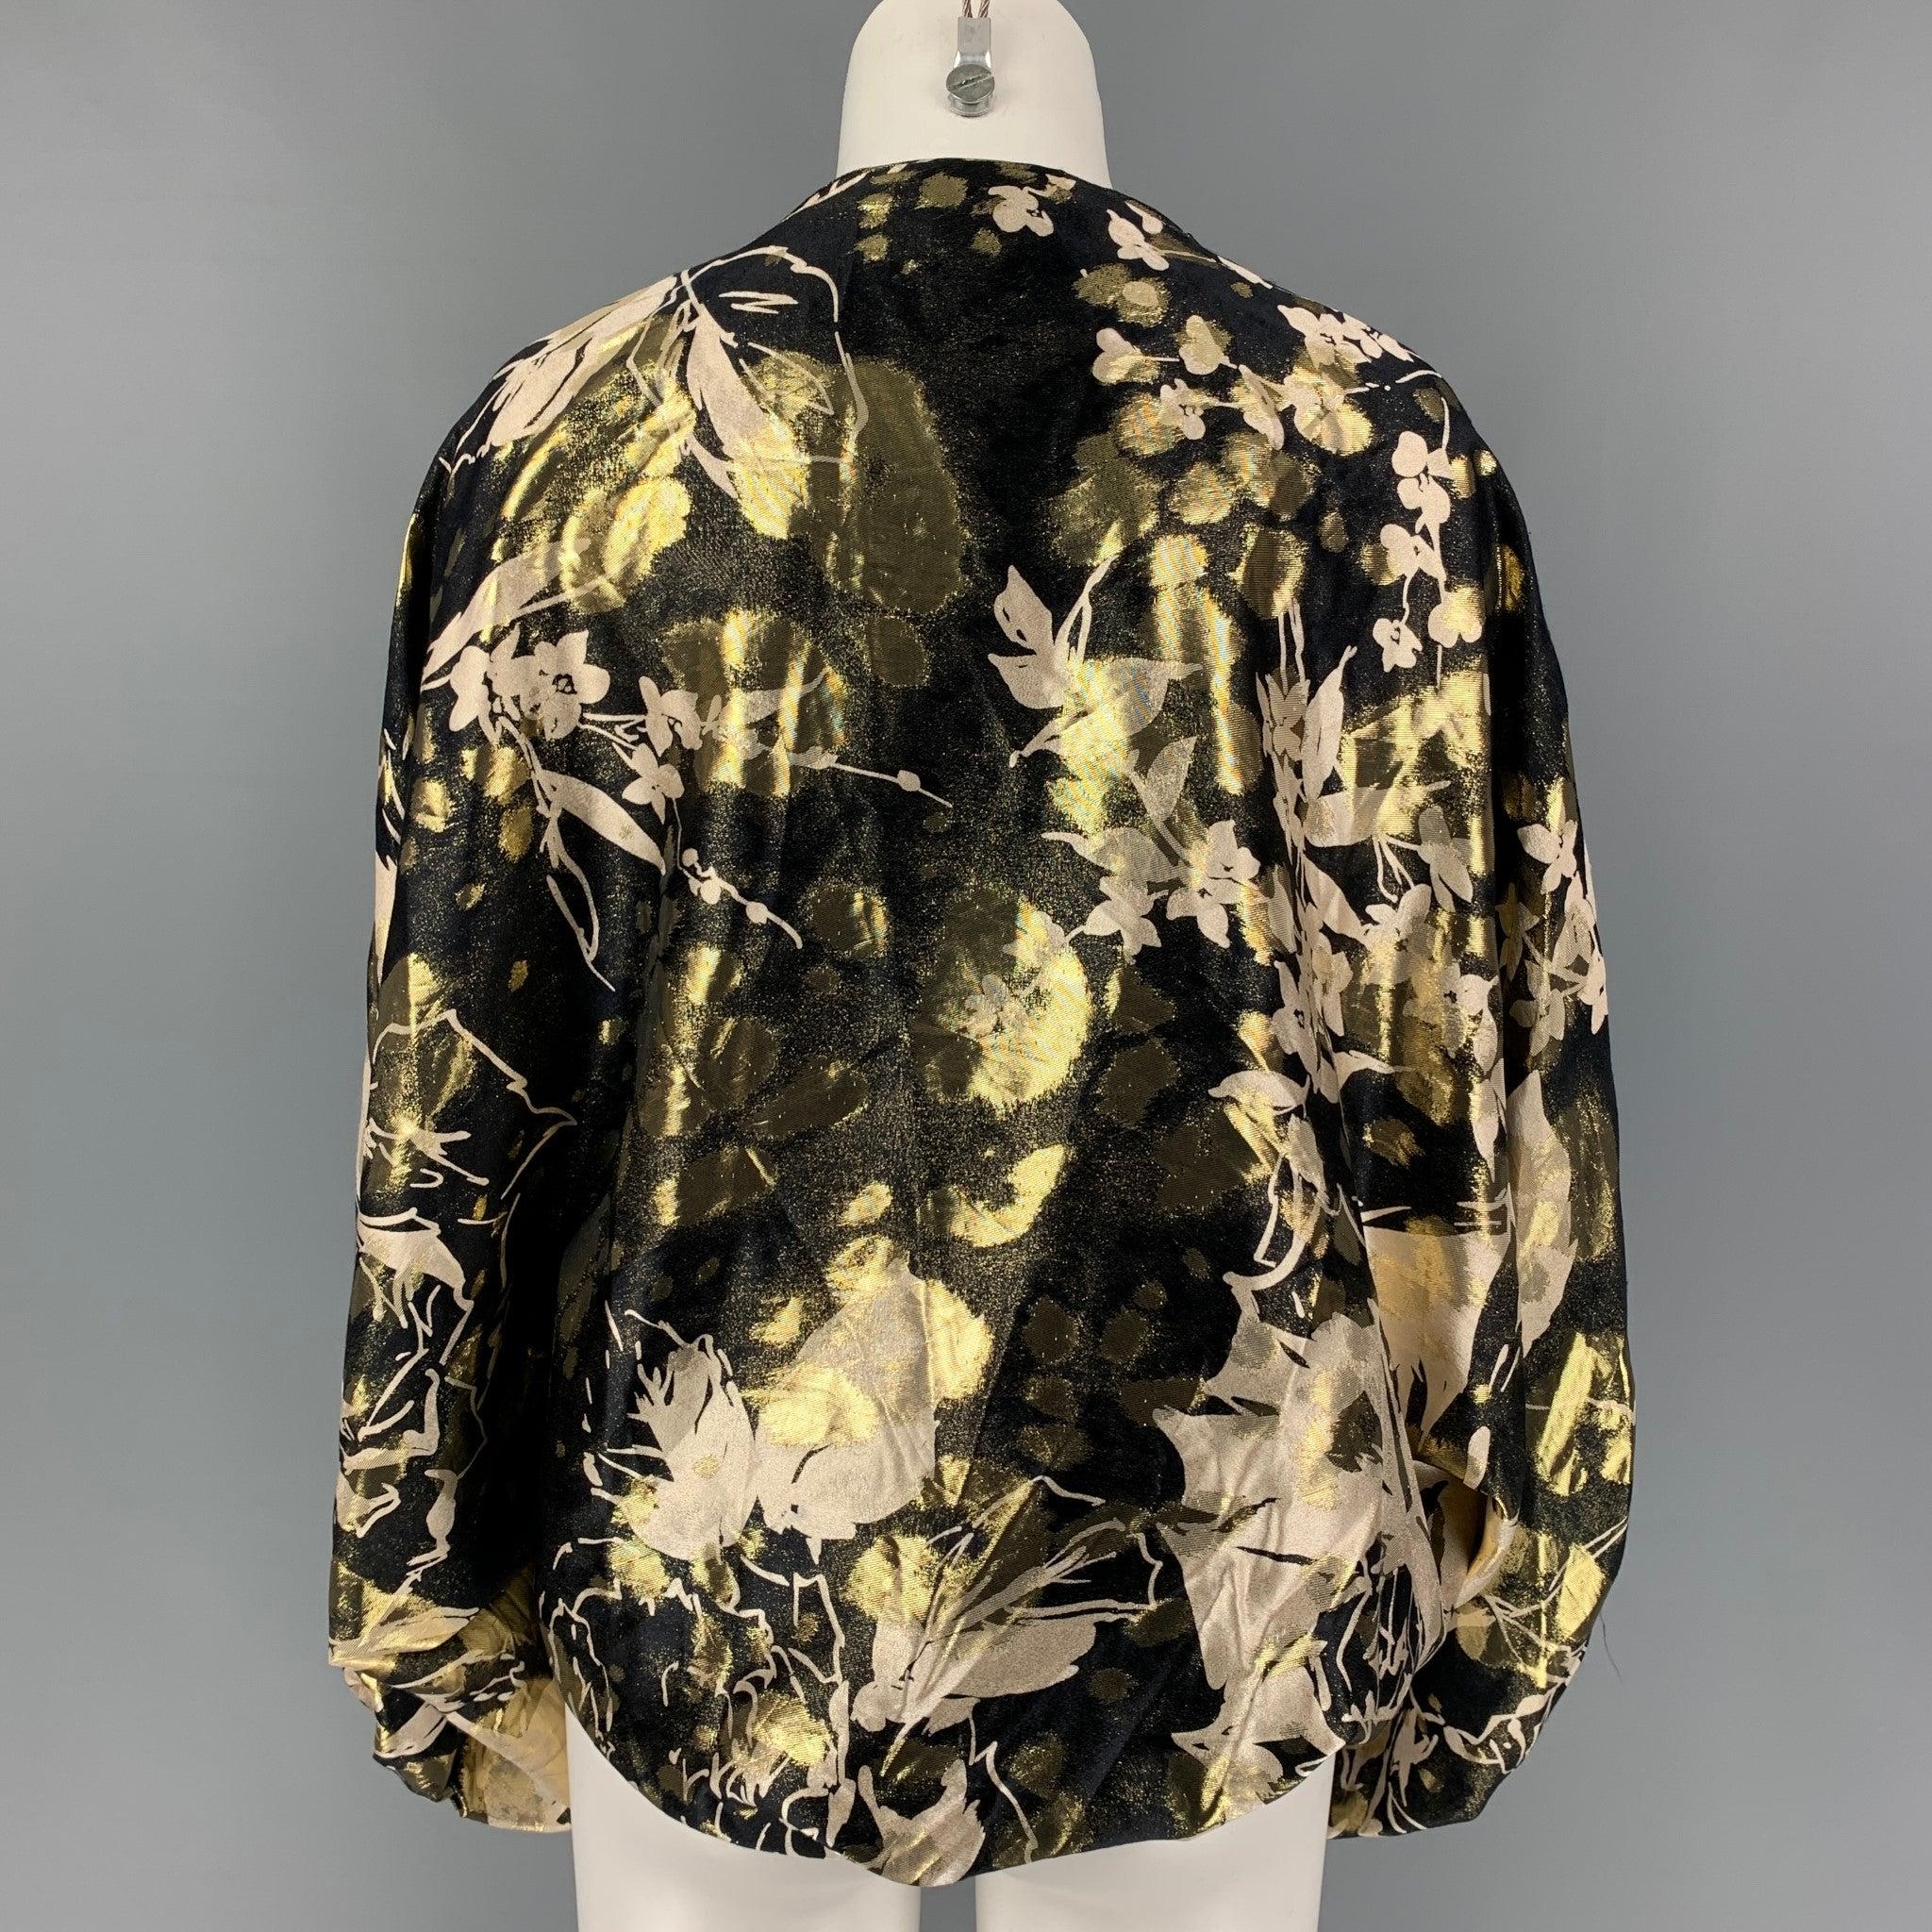 RALPH LAUREN Black Label Size S Gold Black Silk Floral Shrug Casual Top In Good Condition For Sale In San Francisco, CA